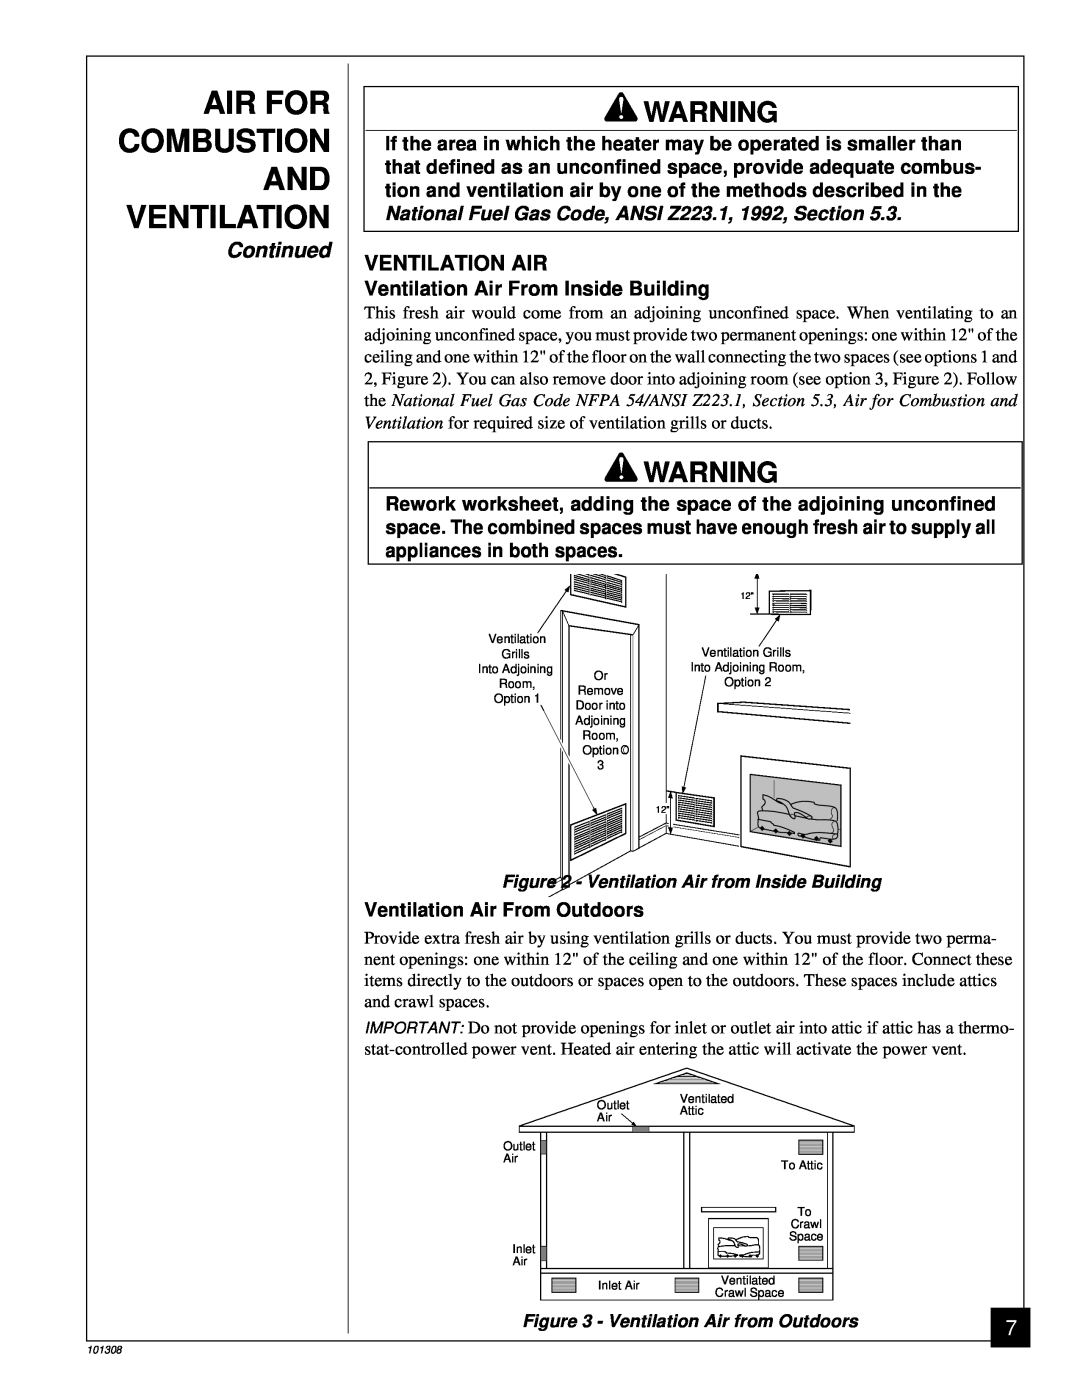 Desa NATURAL GAS LOG HEATER installation manual Combustion, Air For, Continued, Ventilation Air 